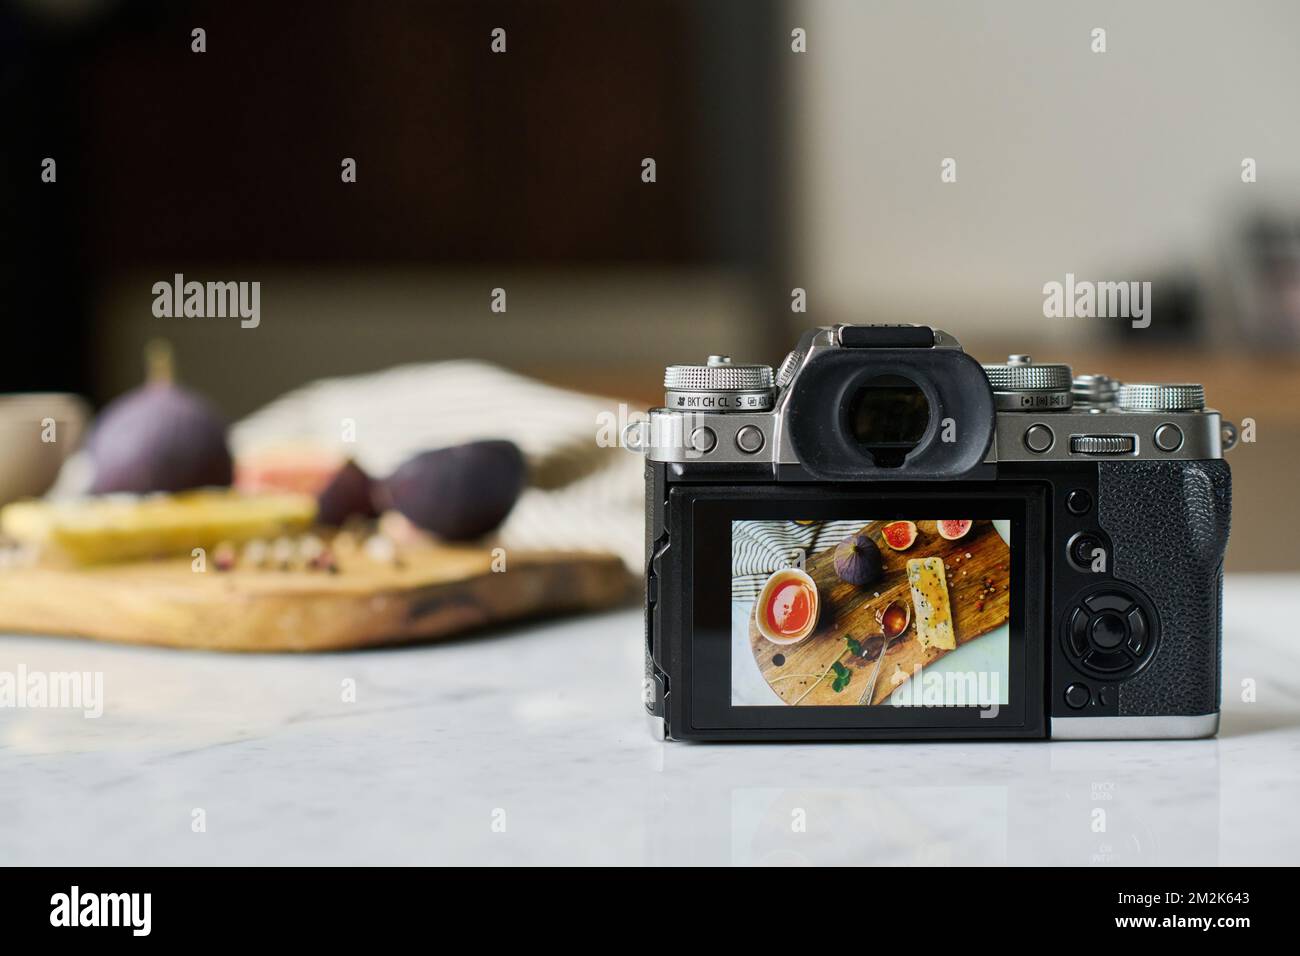 Close-up of professional digital photo camera with photo of food on the screen Stock Photo